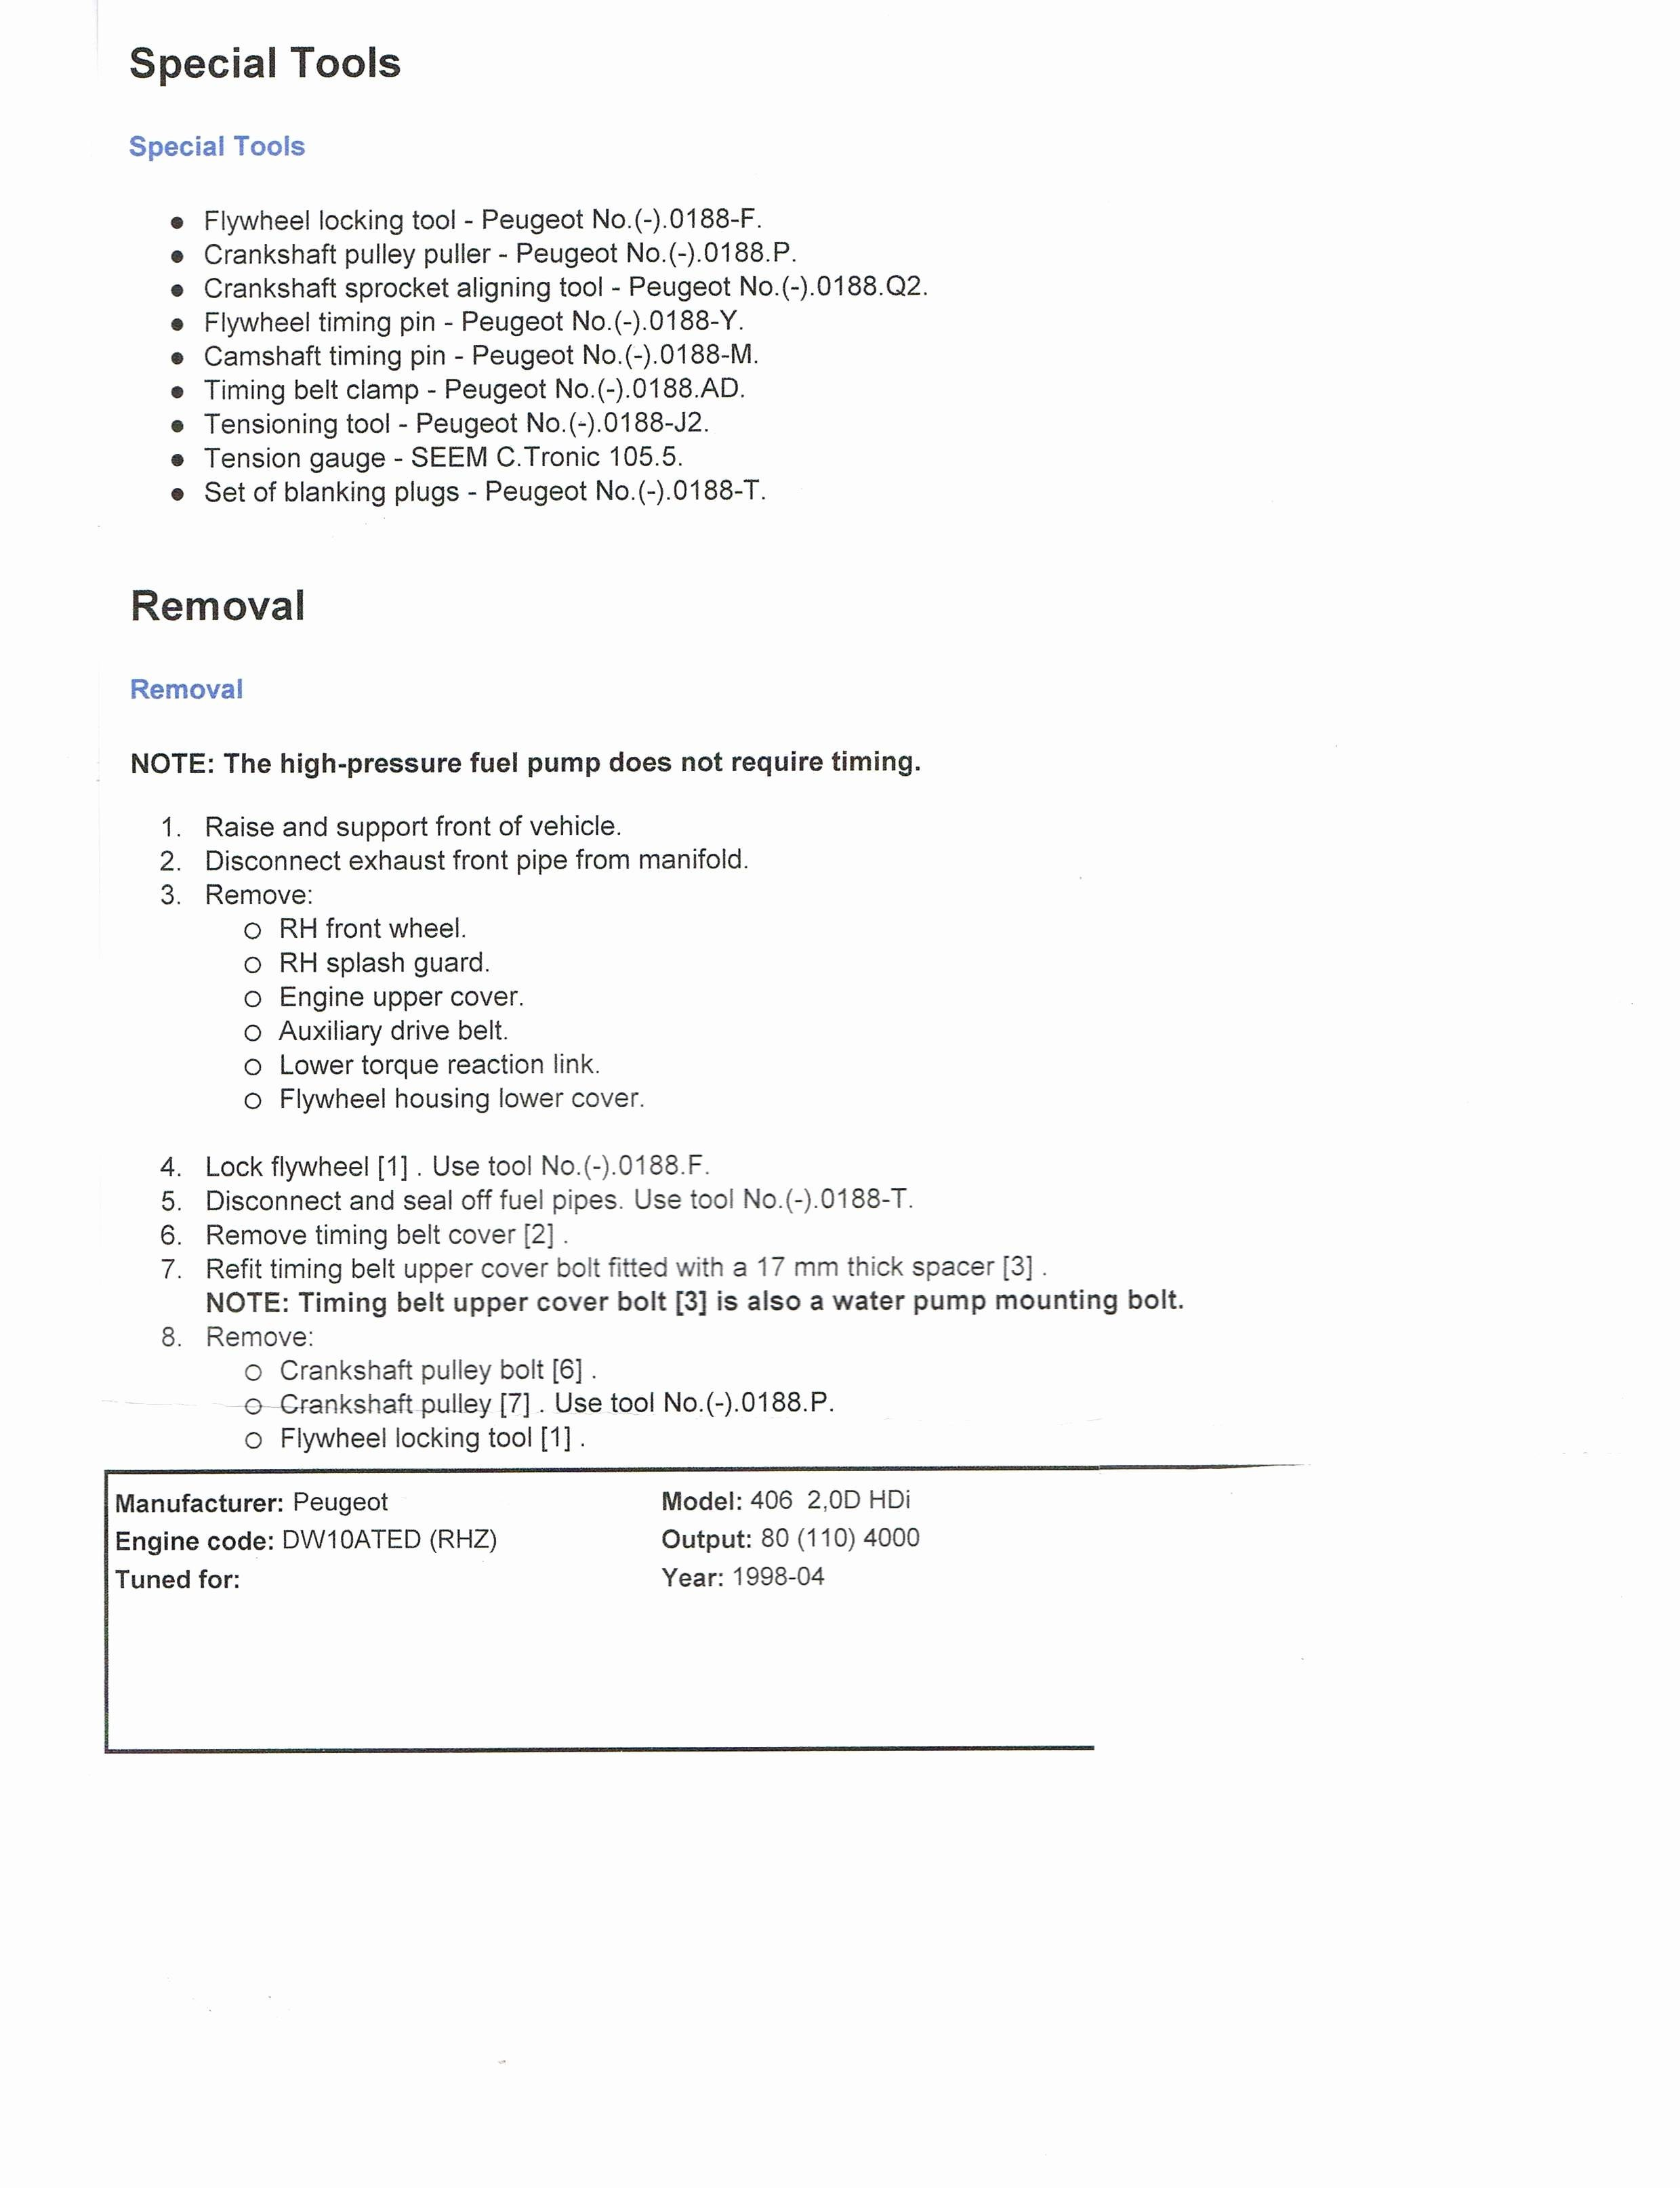 Open Office Cover Letter Template - Open Fice Database Templates